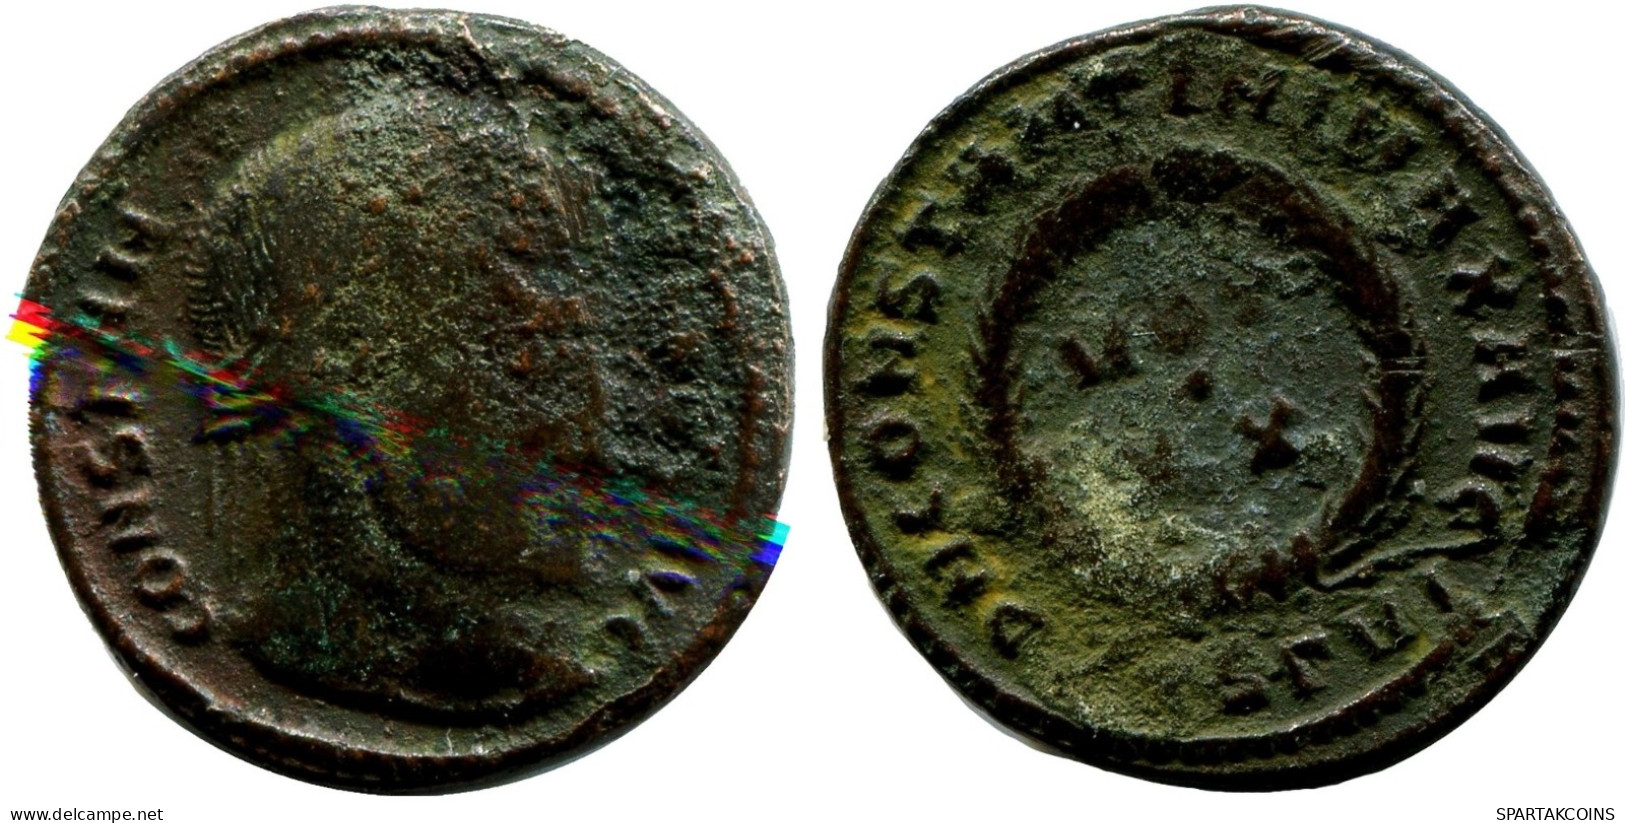 CONSTANTINE I THESSALONICA FROM THE ROYAL ONTARIO MUSEUM #ANC11124.14.U.A - L'Empire Chrétien (307 à 363)